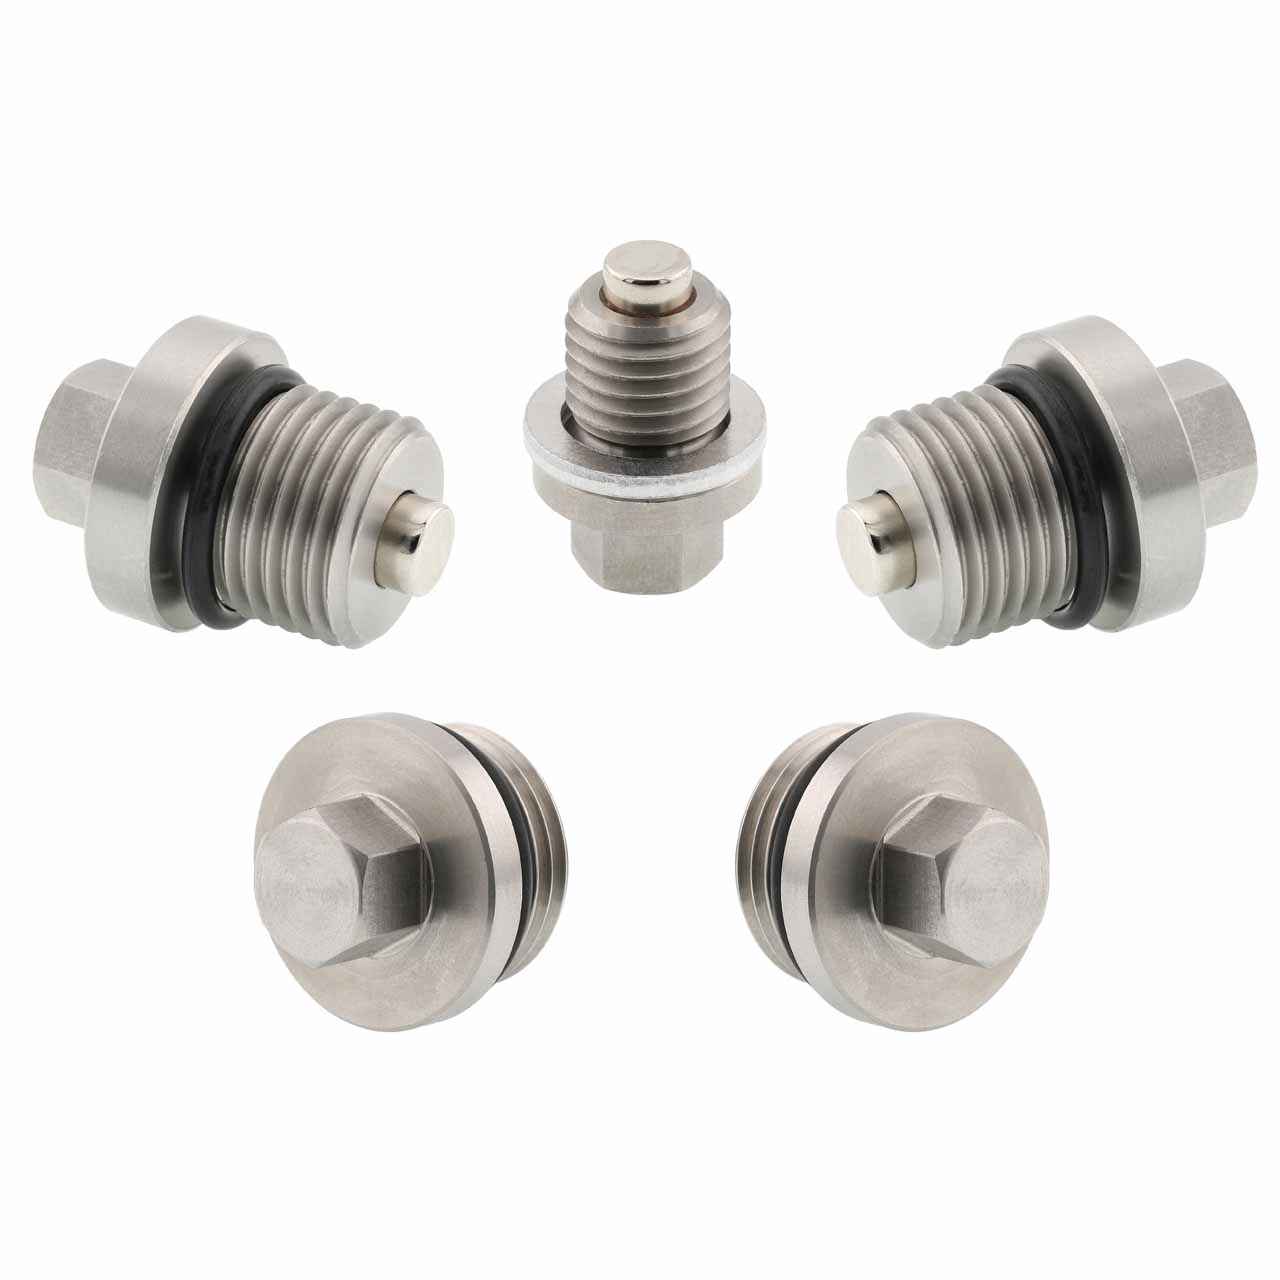 Polaris General 4 1000 EPS Magnetic Oil Drain Plug Kit - 2017-2019 - Engine, Transmission, Differential - Made In USA